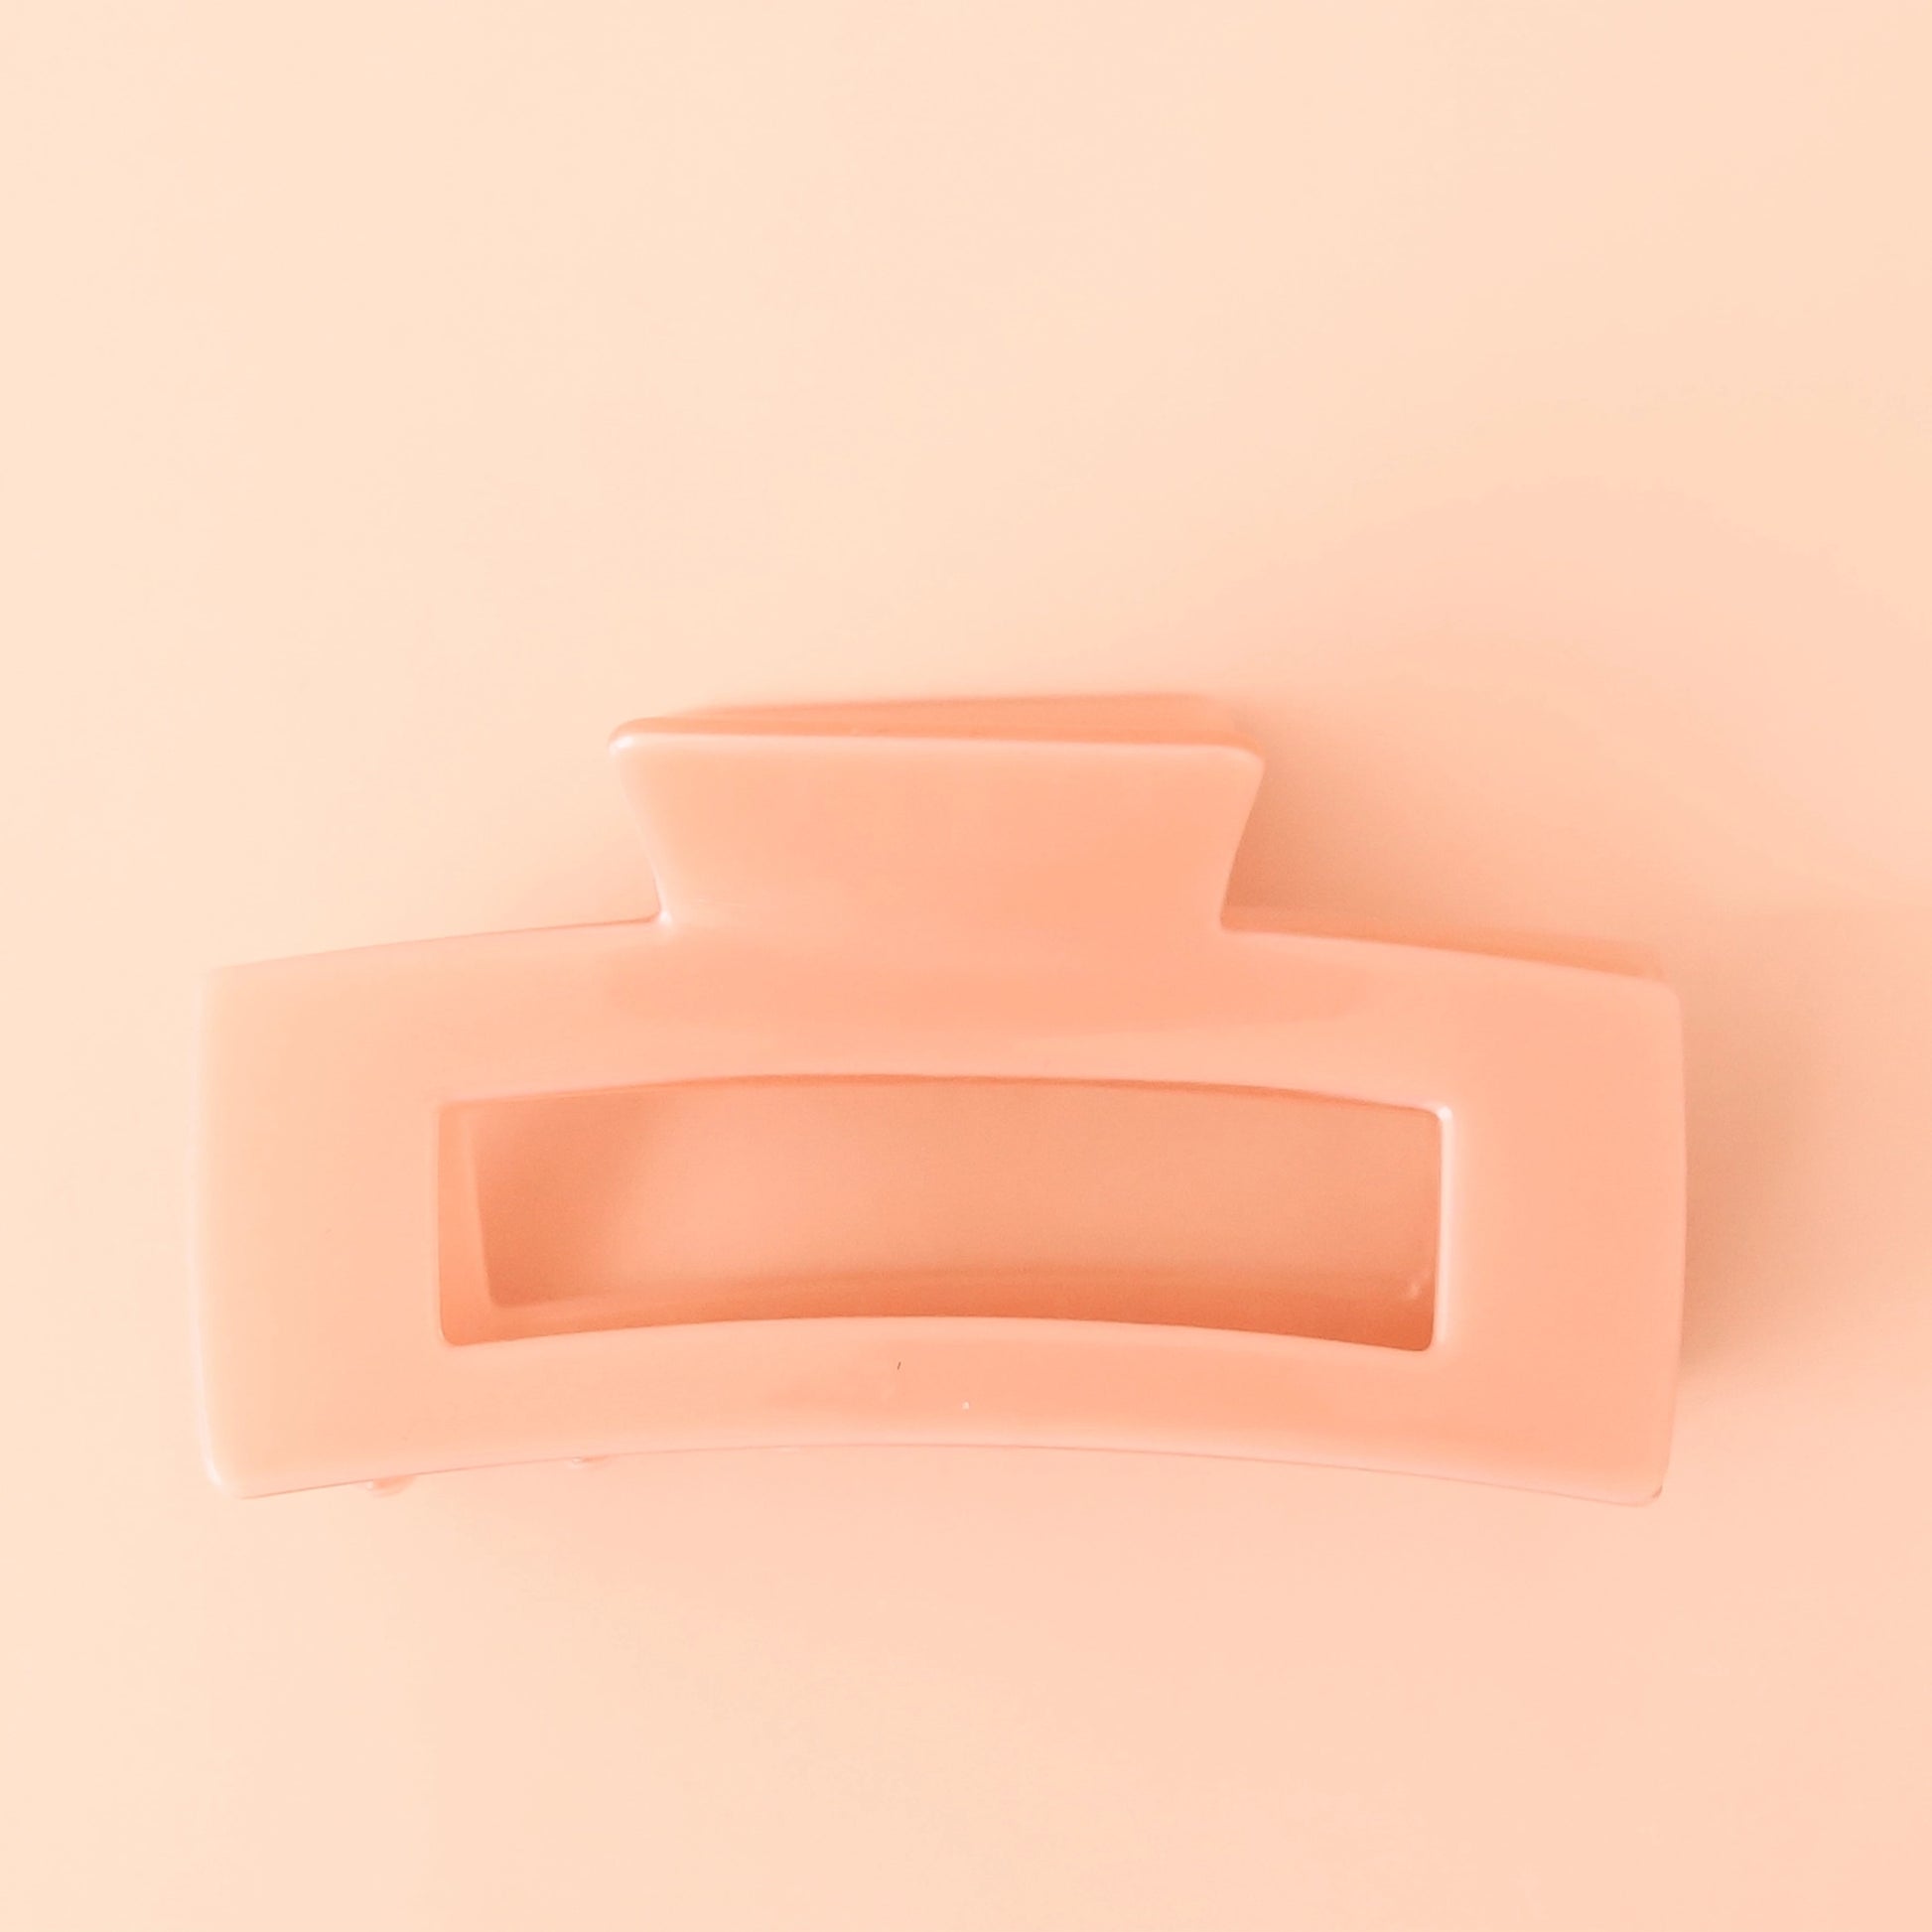 On a light pink background is a light pink rectangle hair clip.